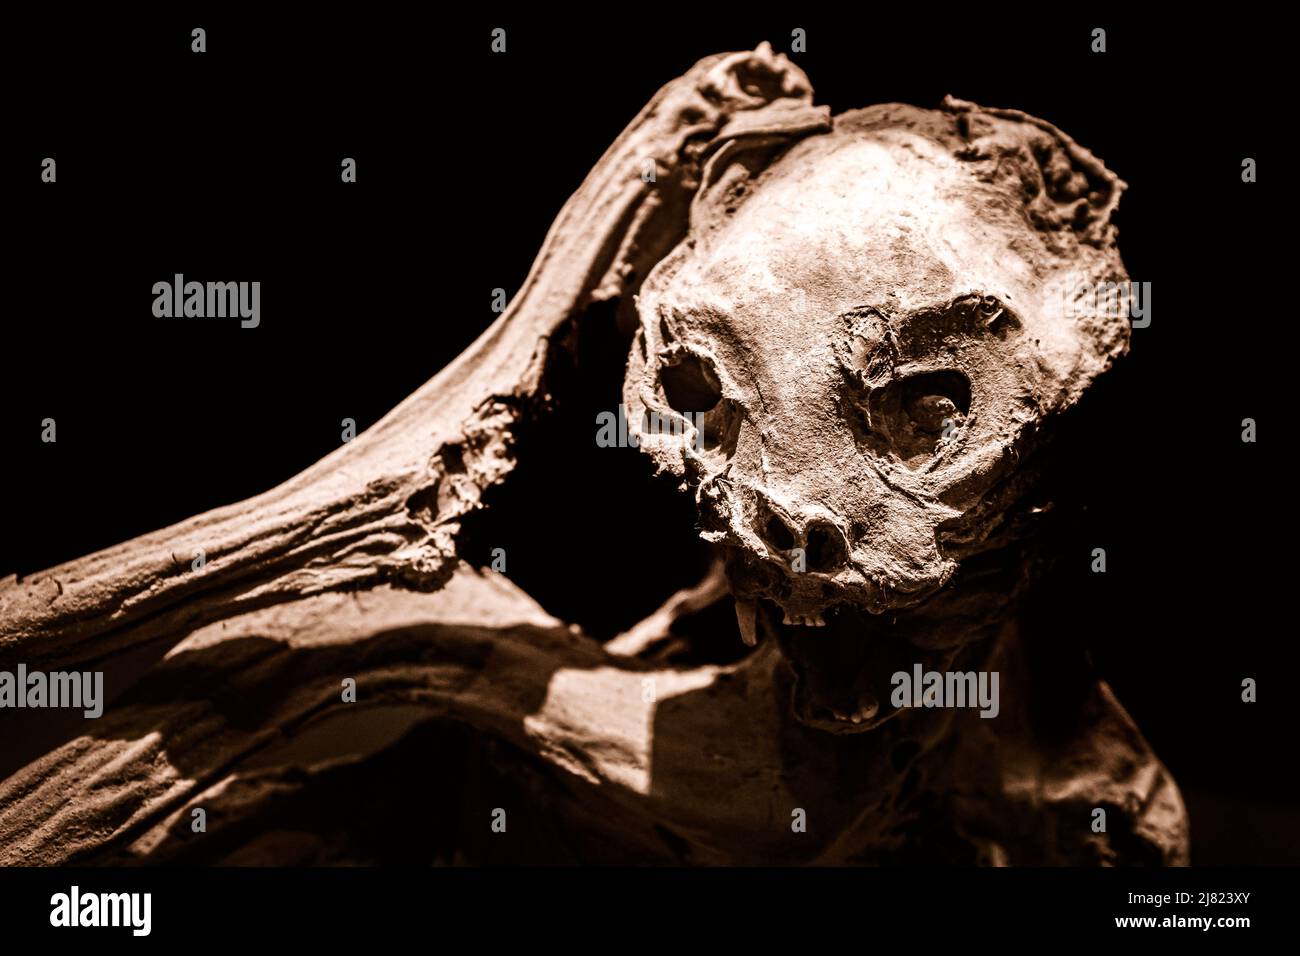 Scary close-up view of a mummified cat isolated on black background, scratching head Stock Photo